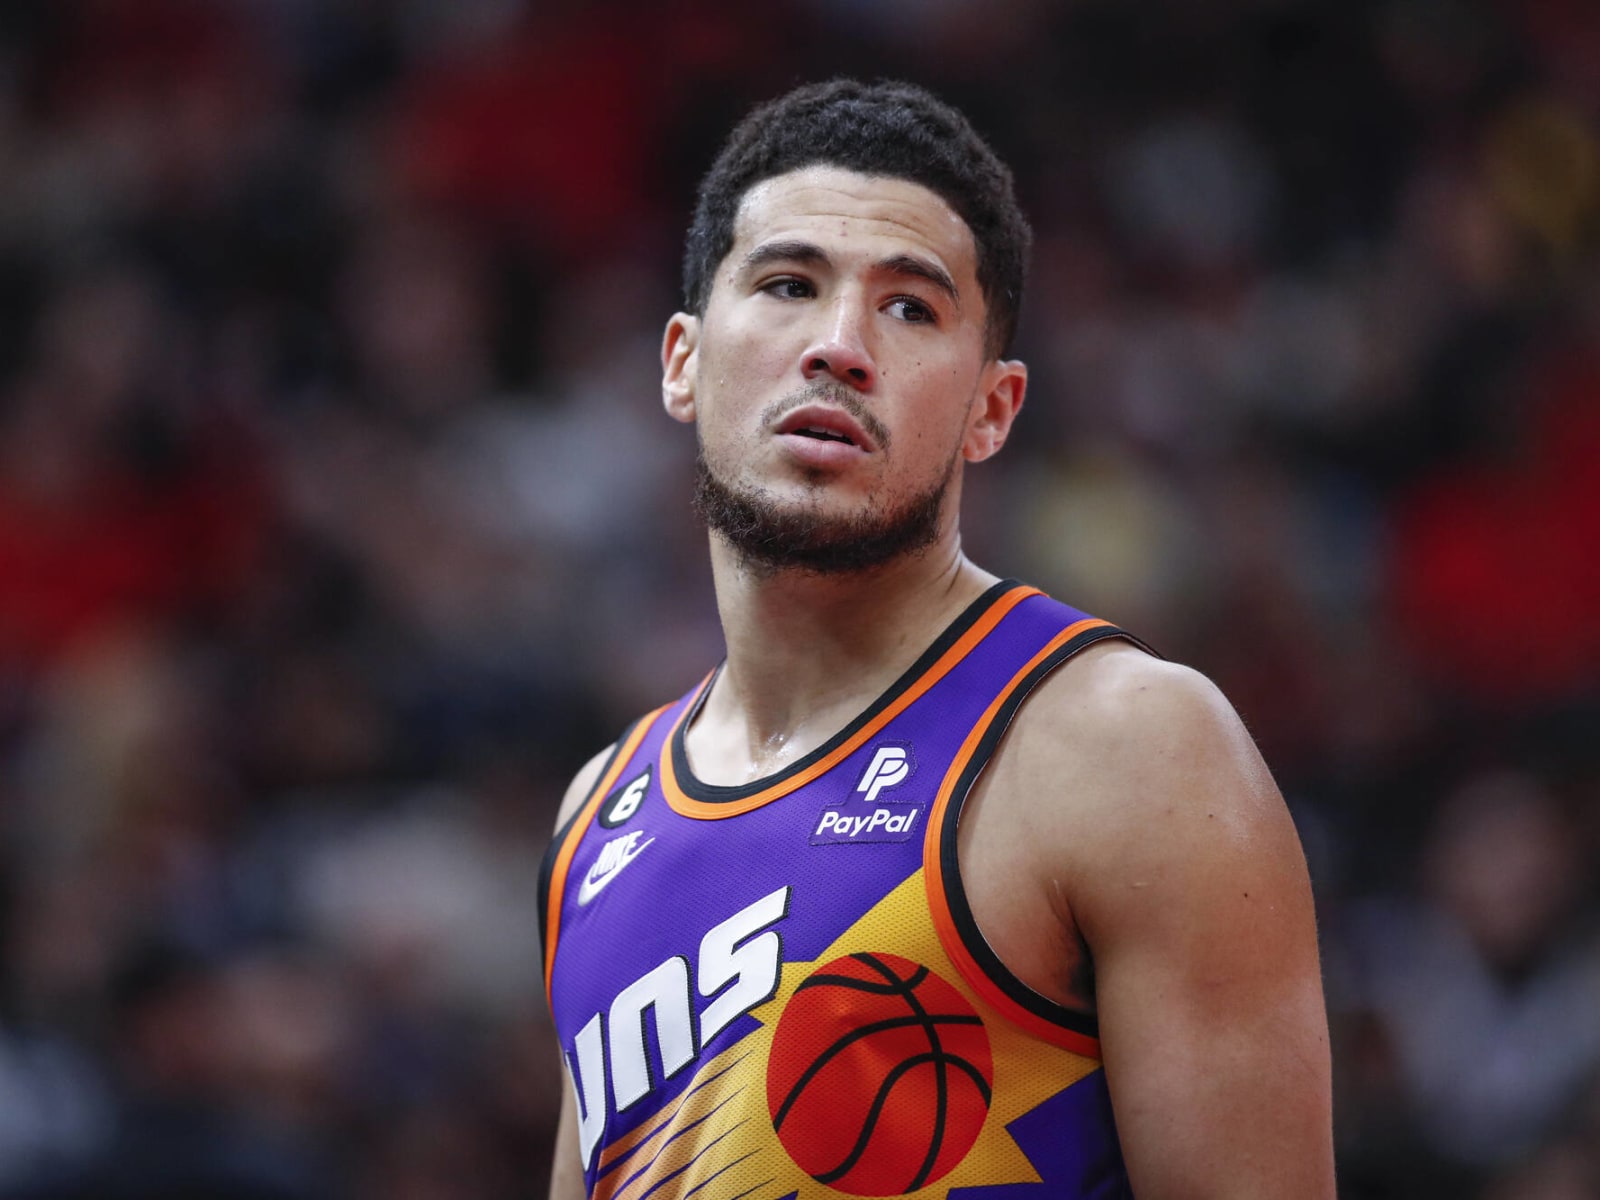 Devin Booker's back-to-back 40-point games overshadowed in NBA